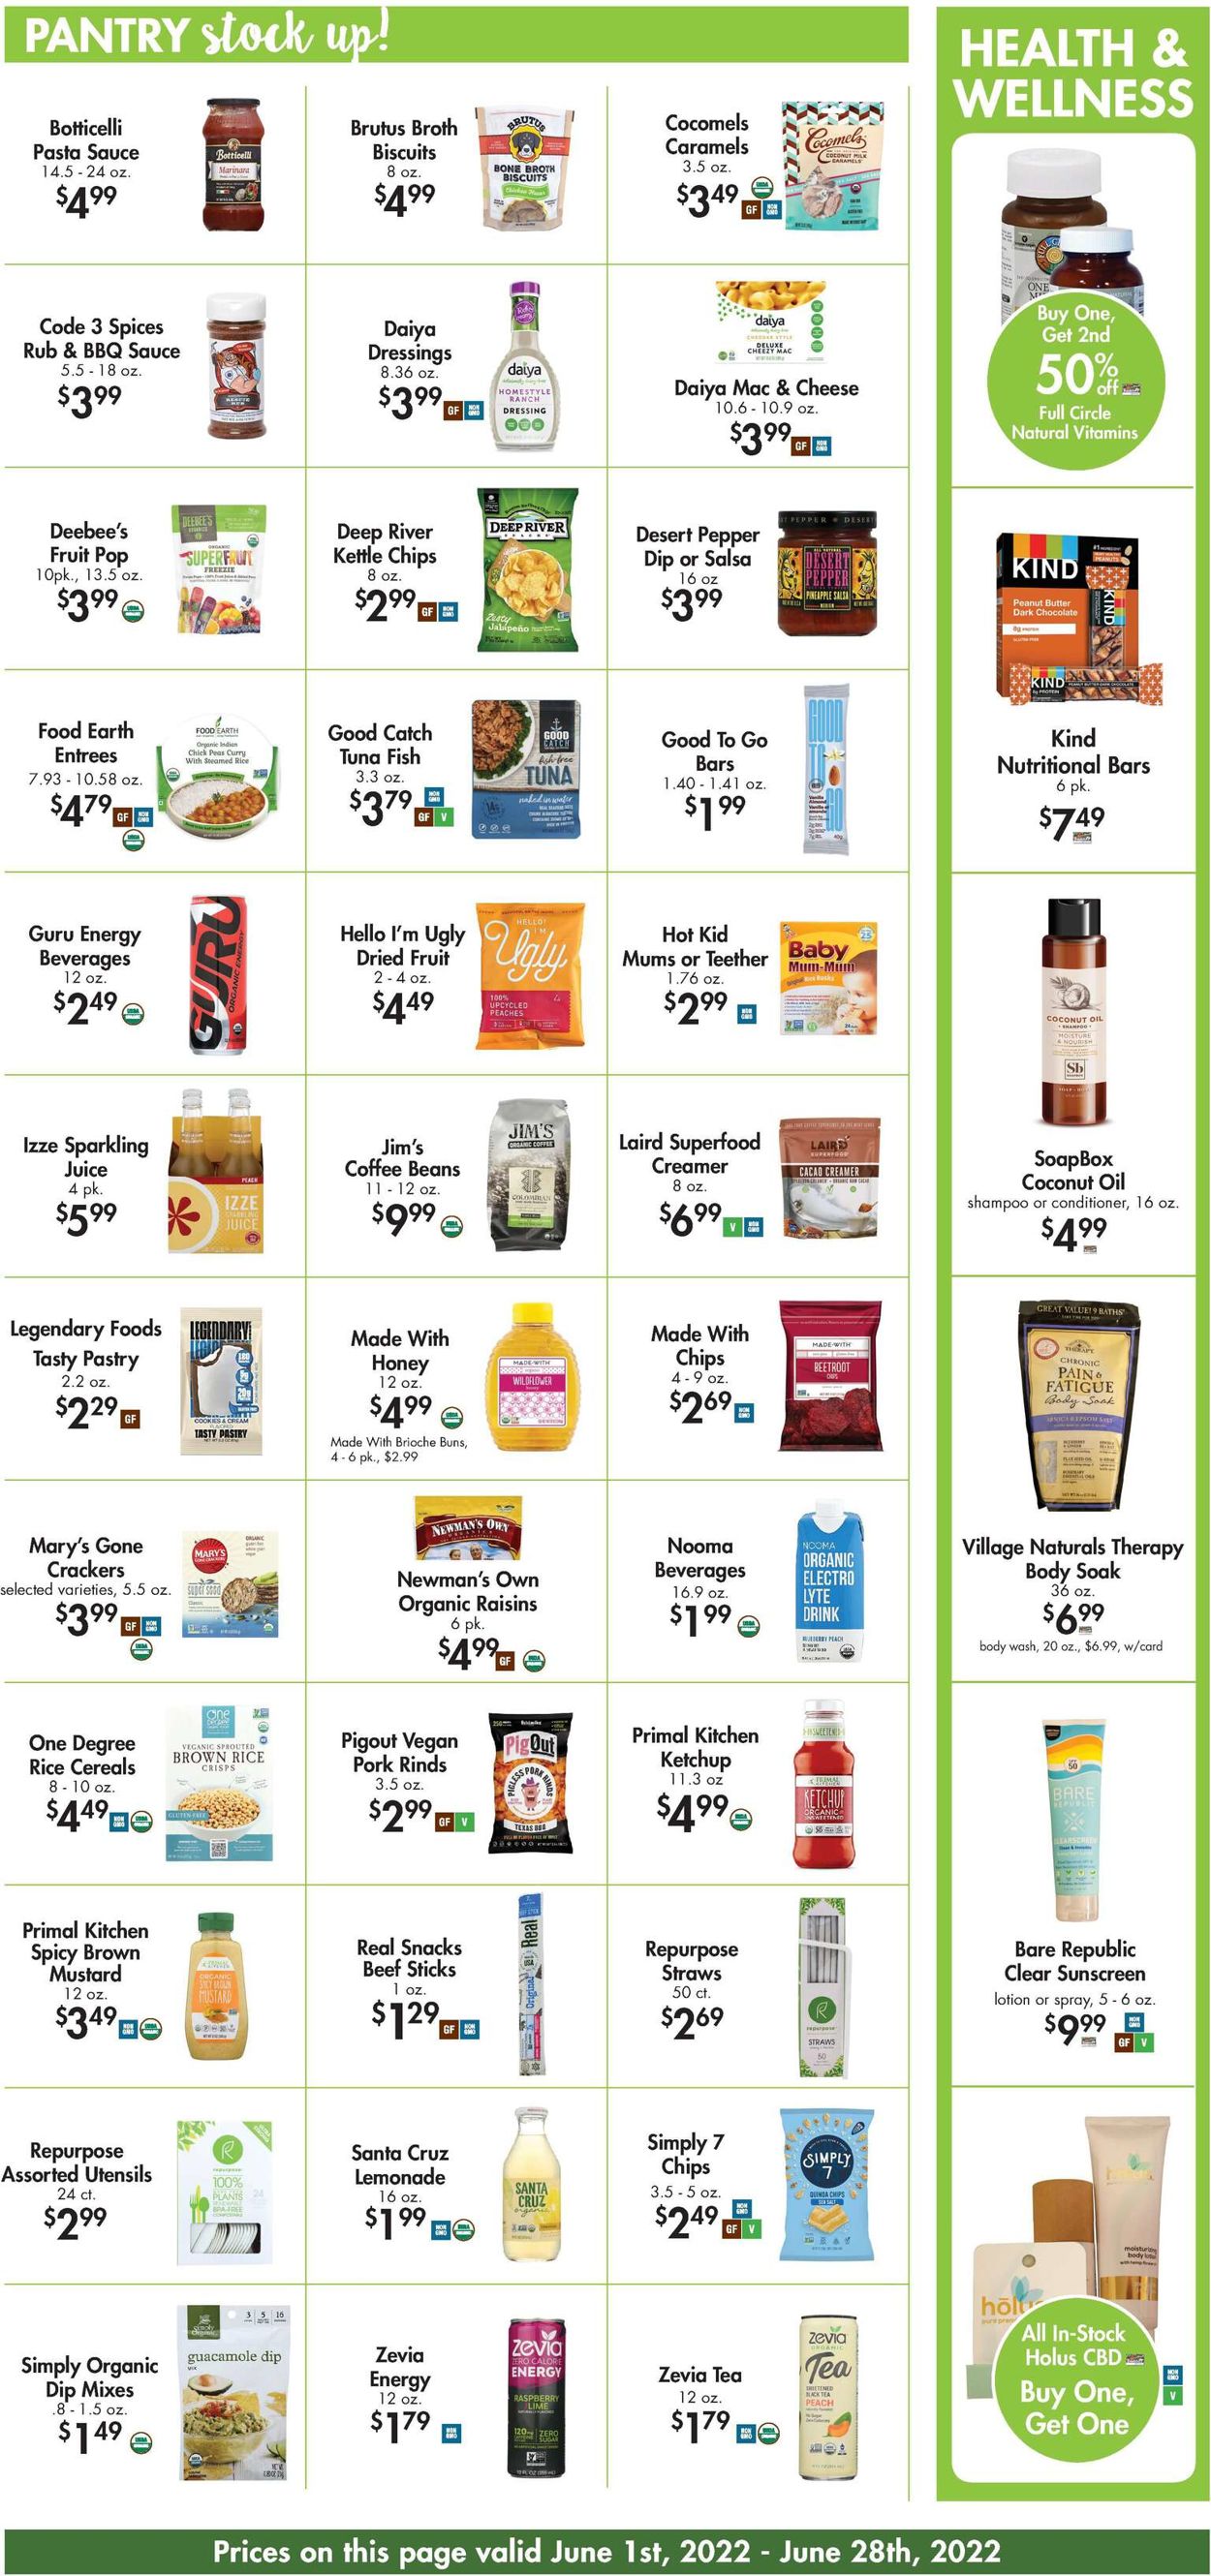 Buehler's Fresh Foods Ad from 06/01/2022